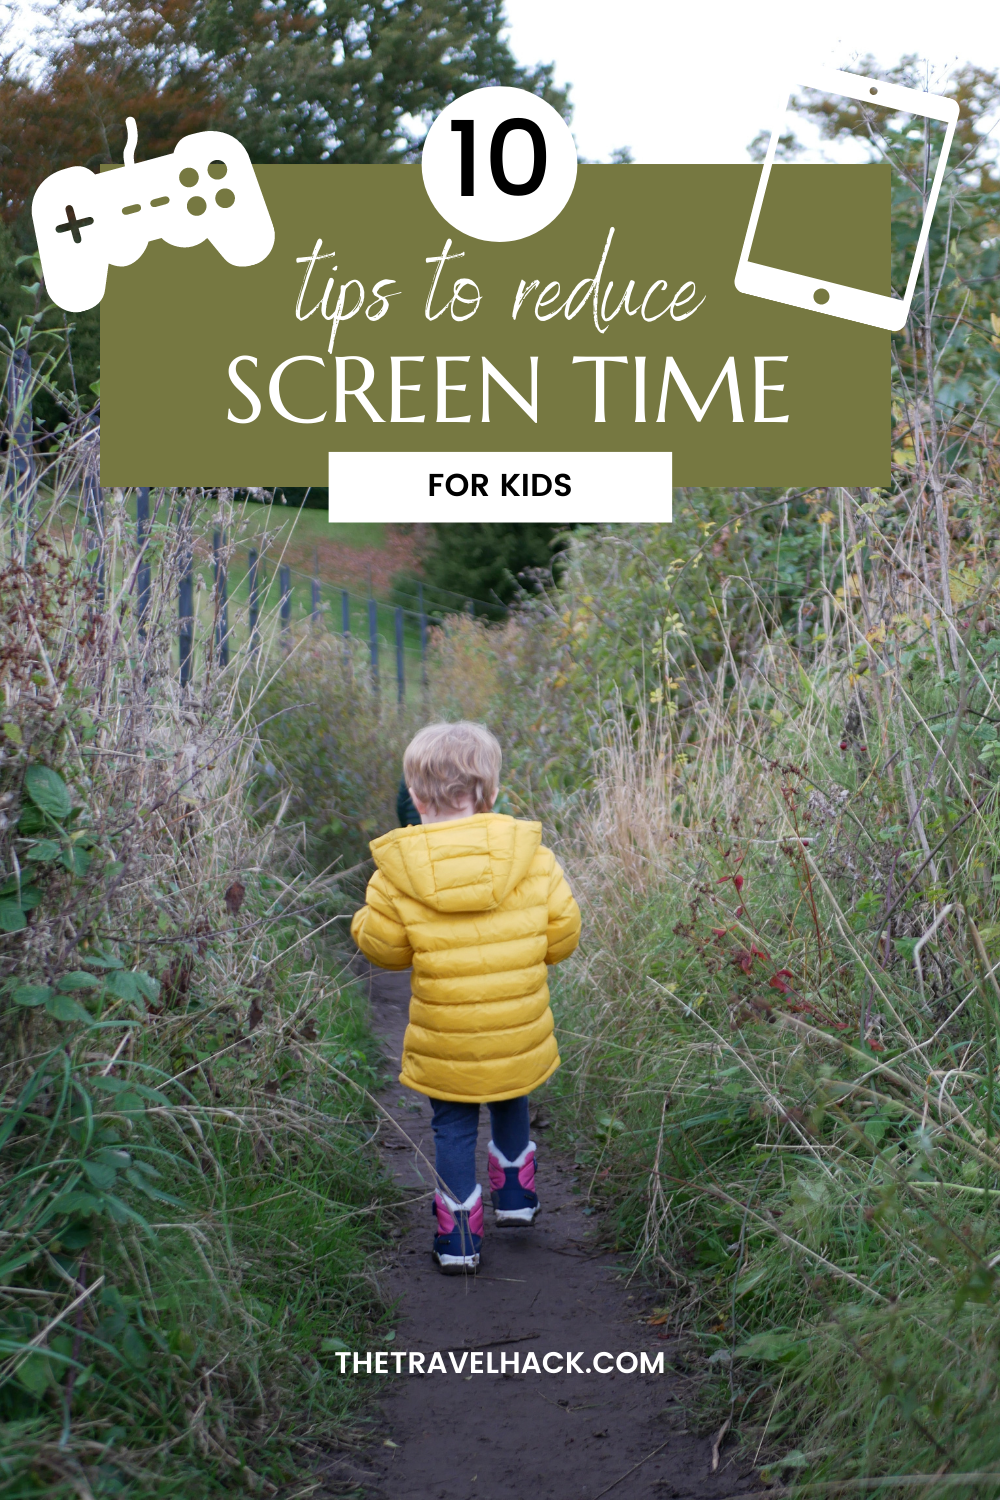 https://thetravelhack.com/wp-content/uploads/2022/02/10-tips-to-reduce-screen-time-for-kids.png